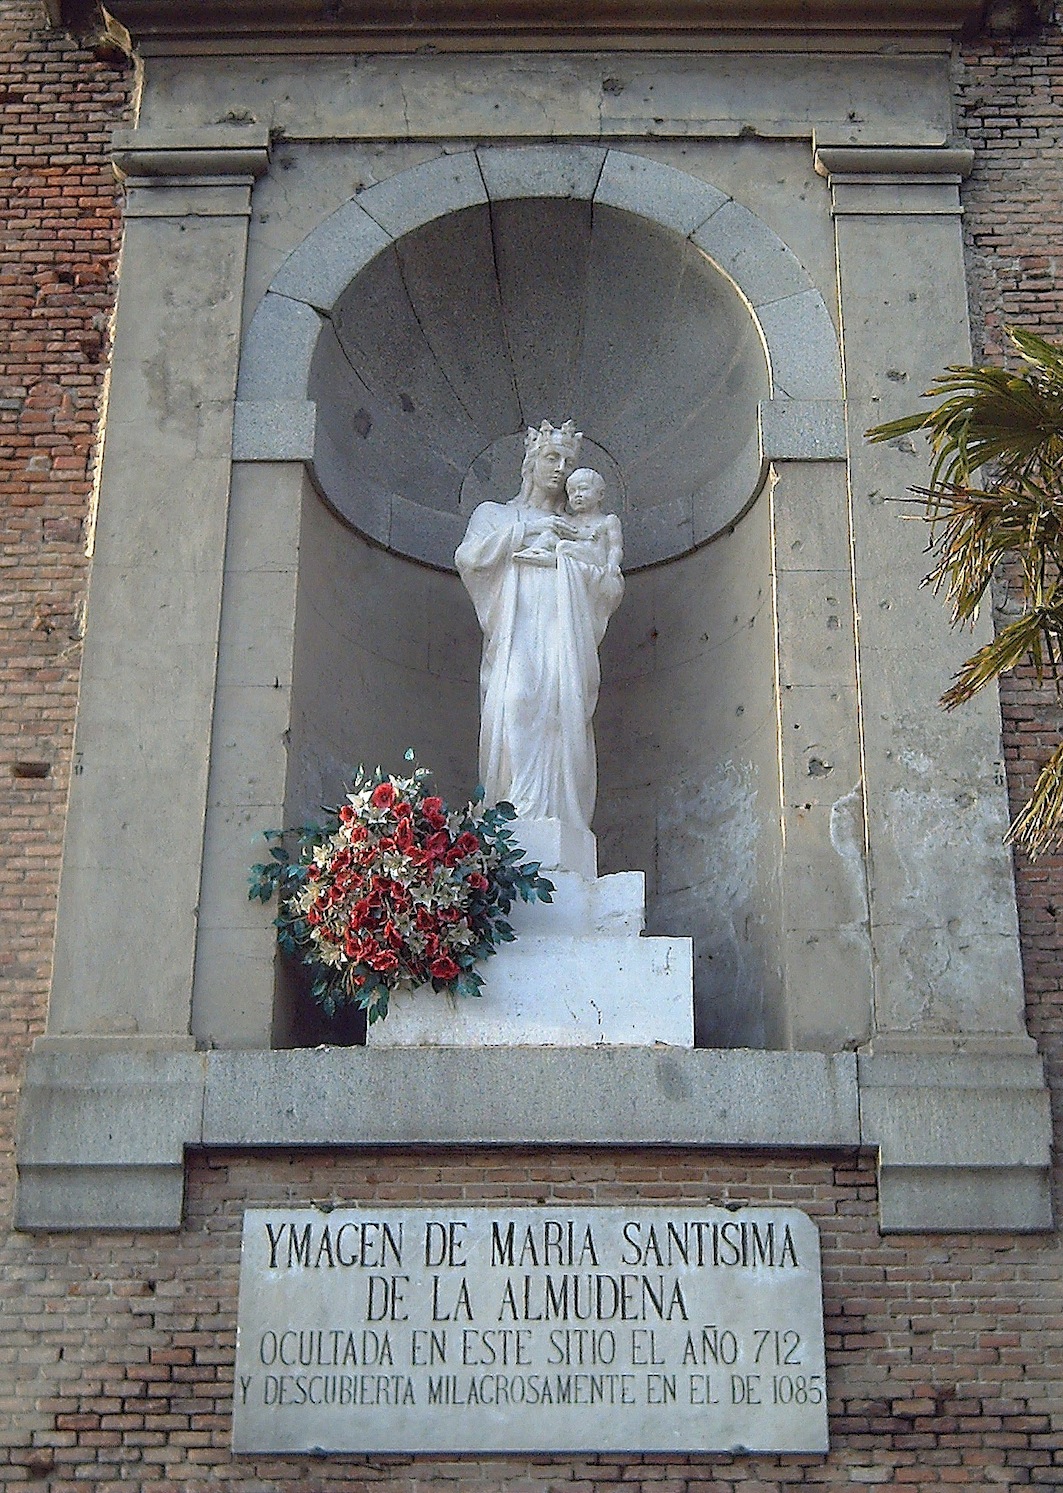 Image of the Virgin Mary on the rear wall of the Almudena Cathedral in Madrid